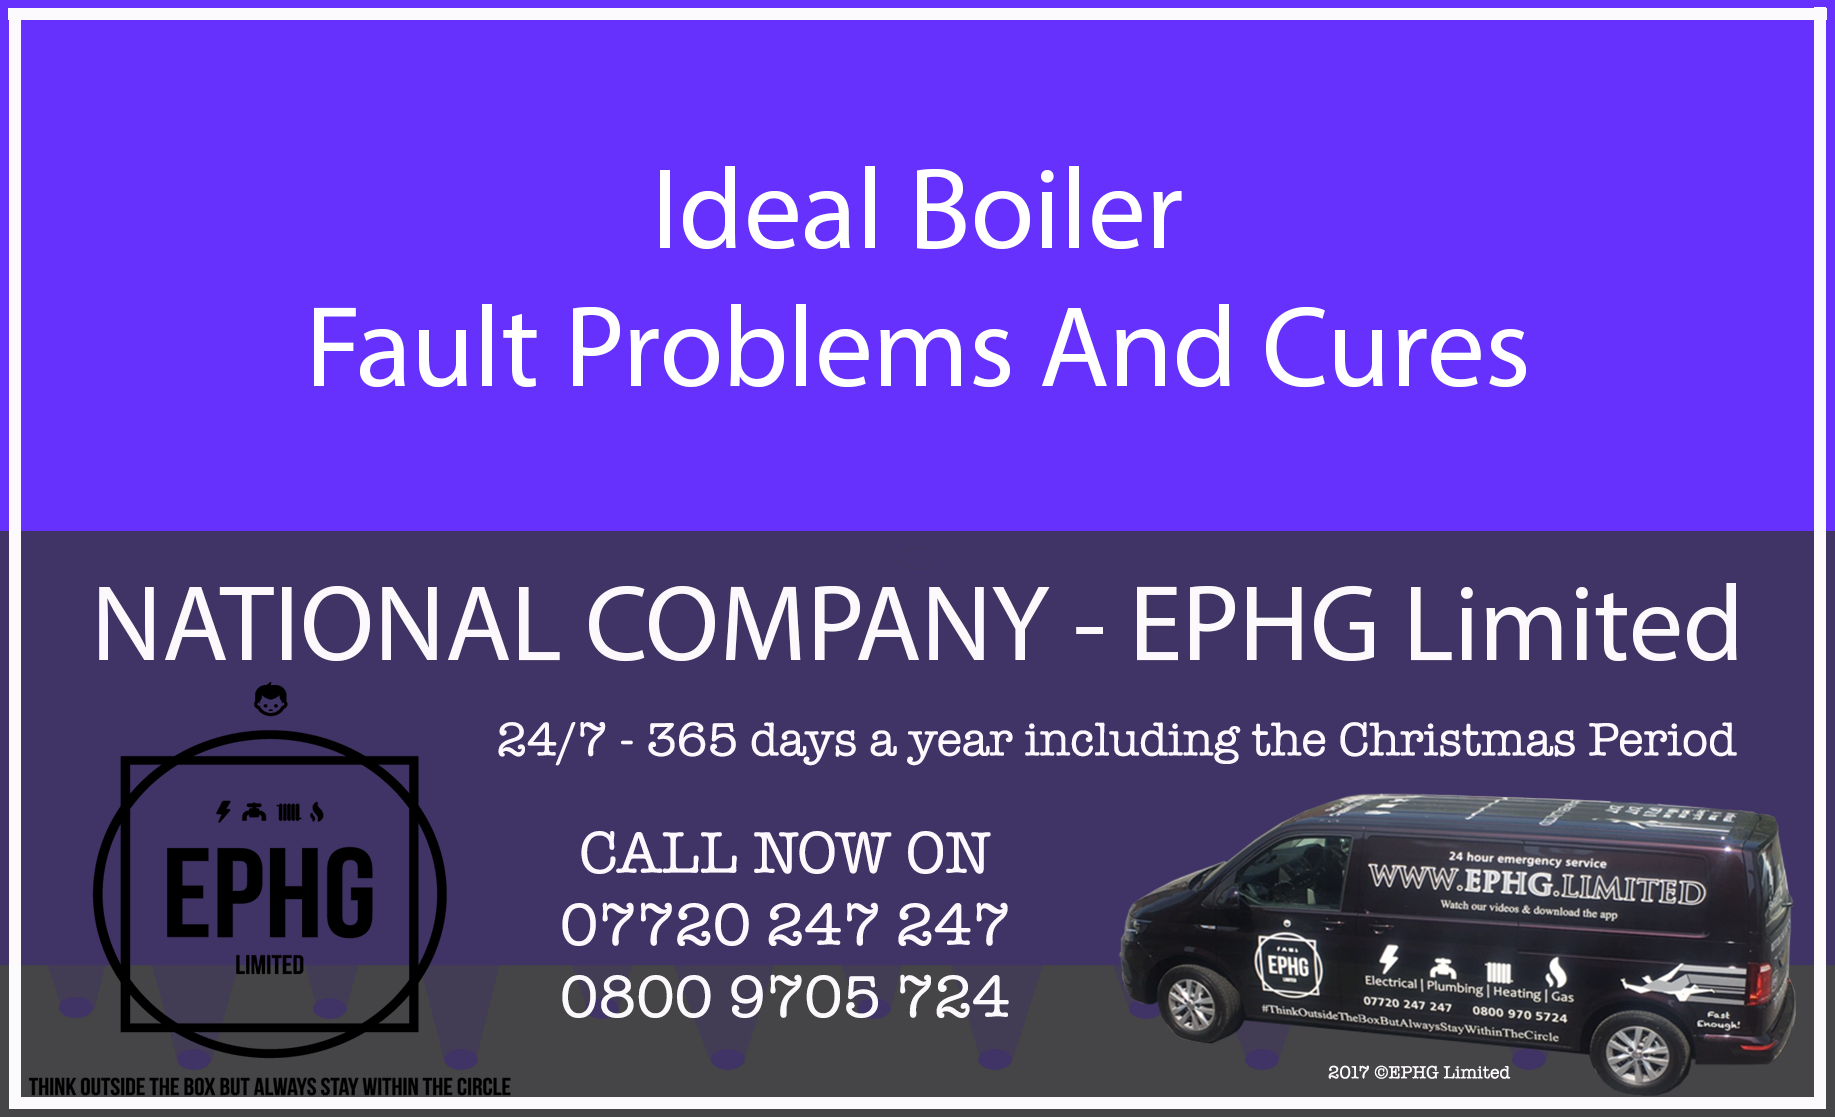 Ideal Boiler Fault Problem And Cures